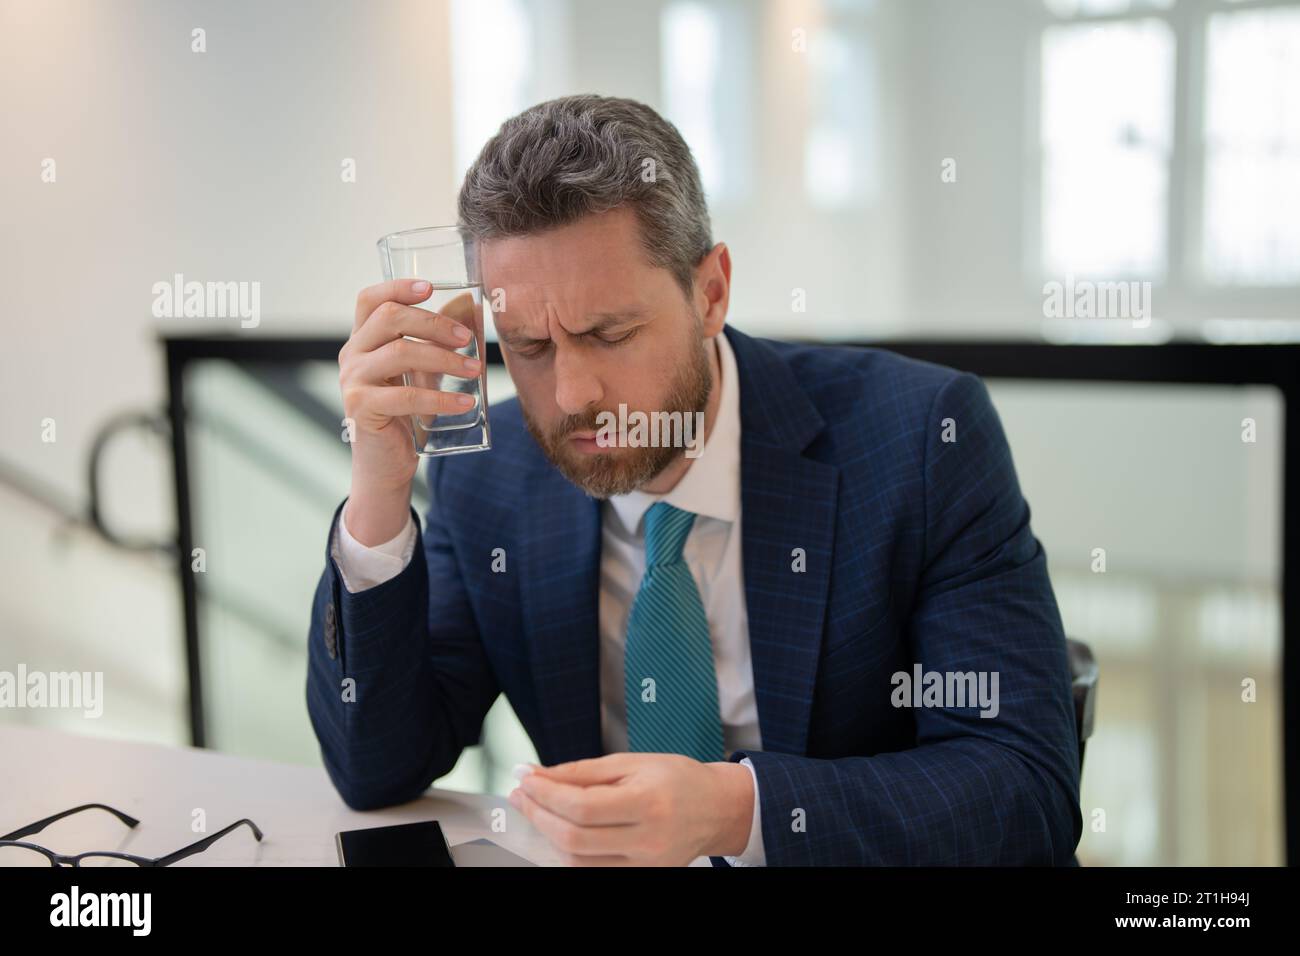 Overworked burnout man feeling migraine head strain. Tired bored business man has office syndrome. Man taking a Medicine pill from headache migraine Stock Photo